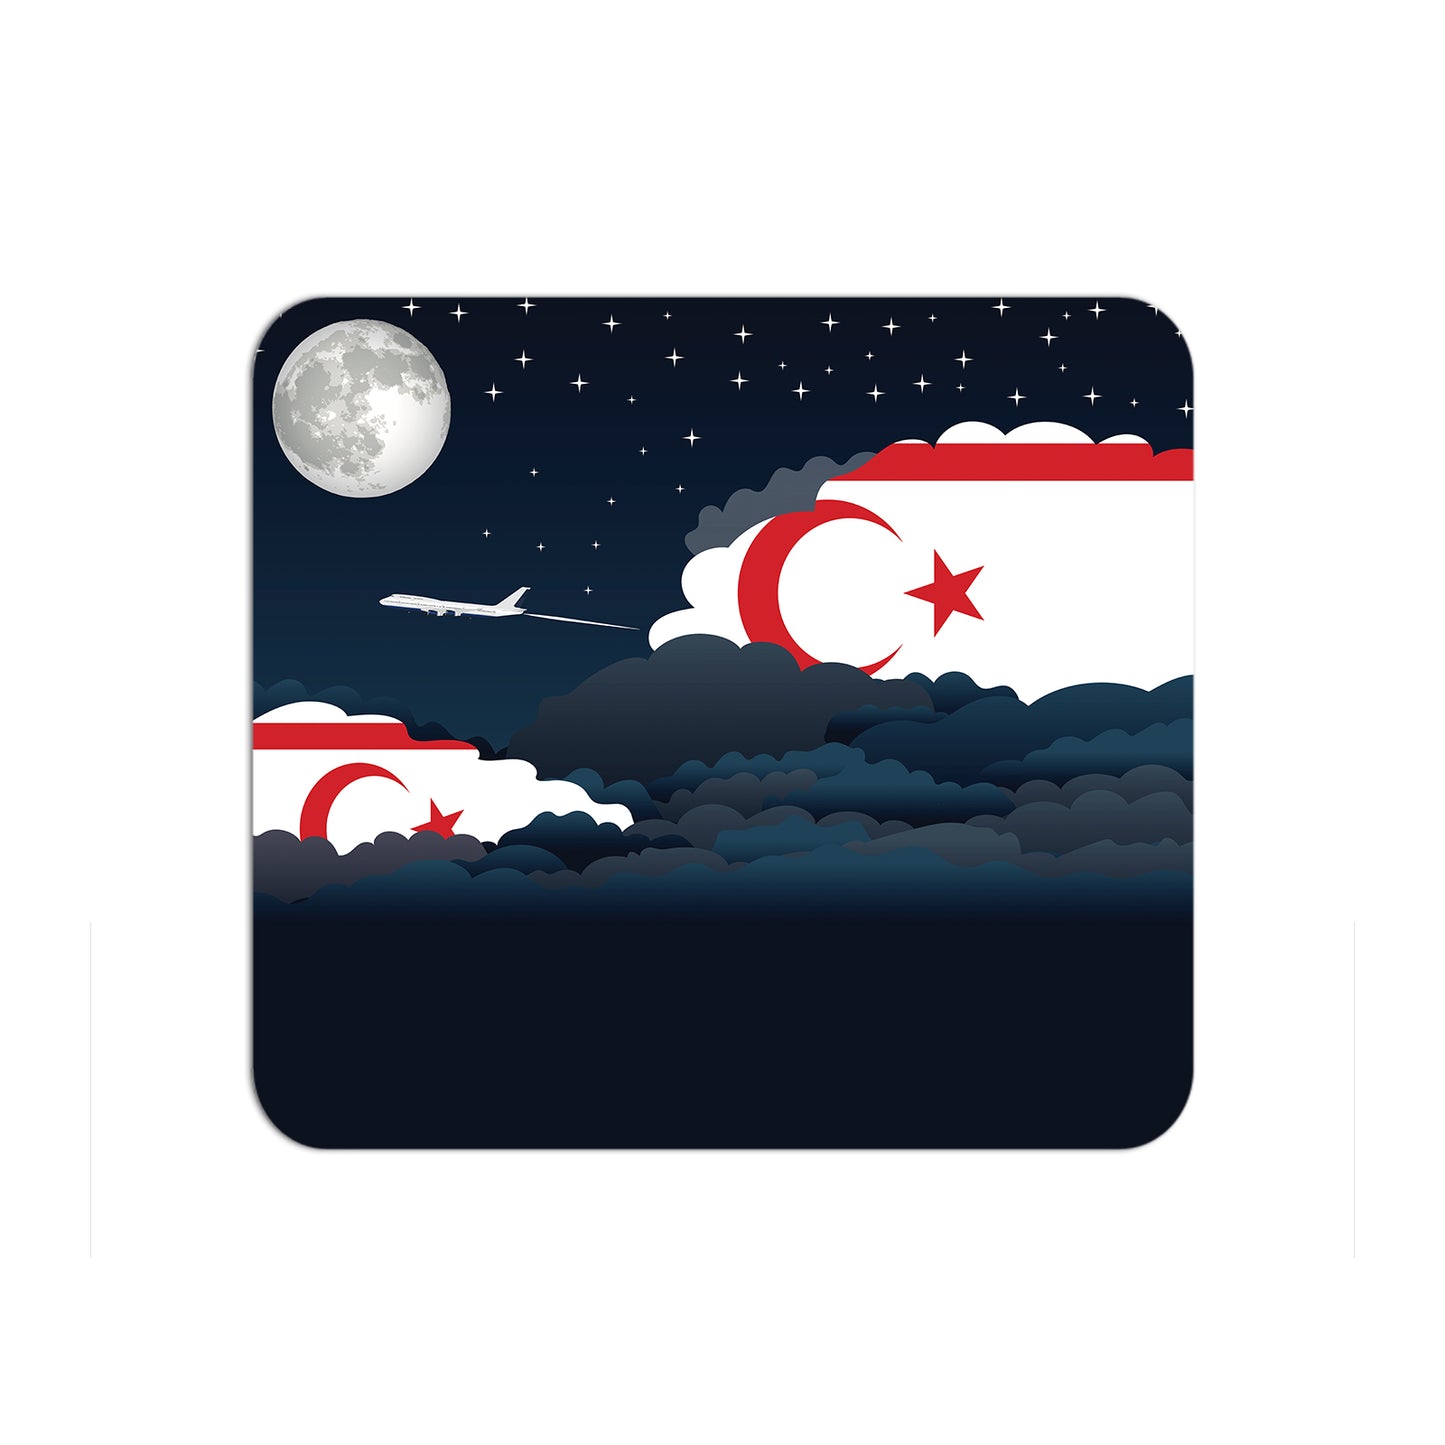 Turkish Republic of Northern Cyprus Flag Night Clouds Mouse pad 